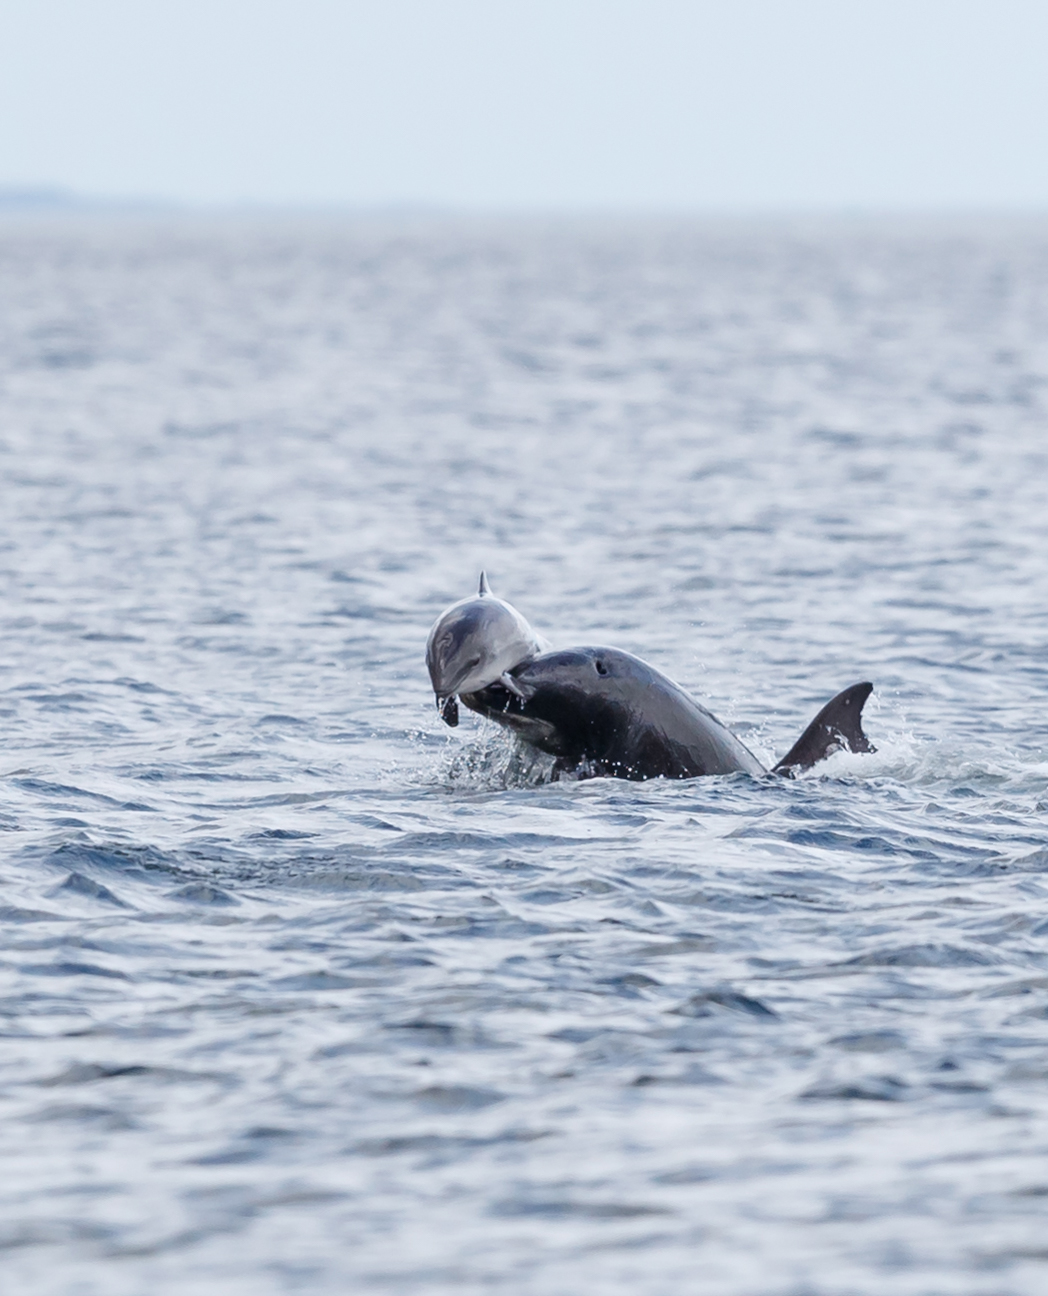 Harbour porpoise just minutes before being thrown up in the air by a bottlenose dolphin on May 9th. Copyright: Jamie Muny